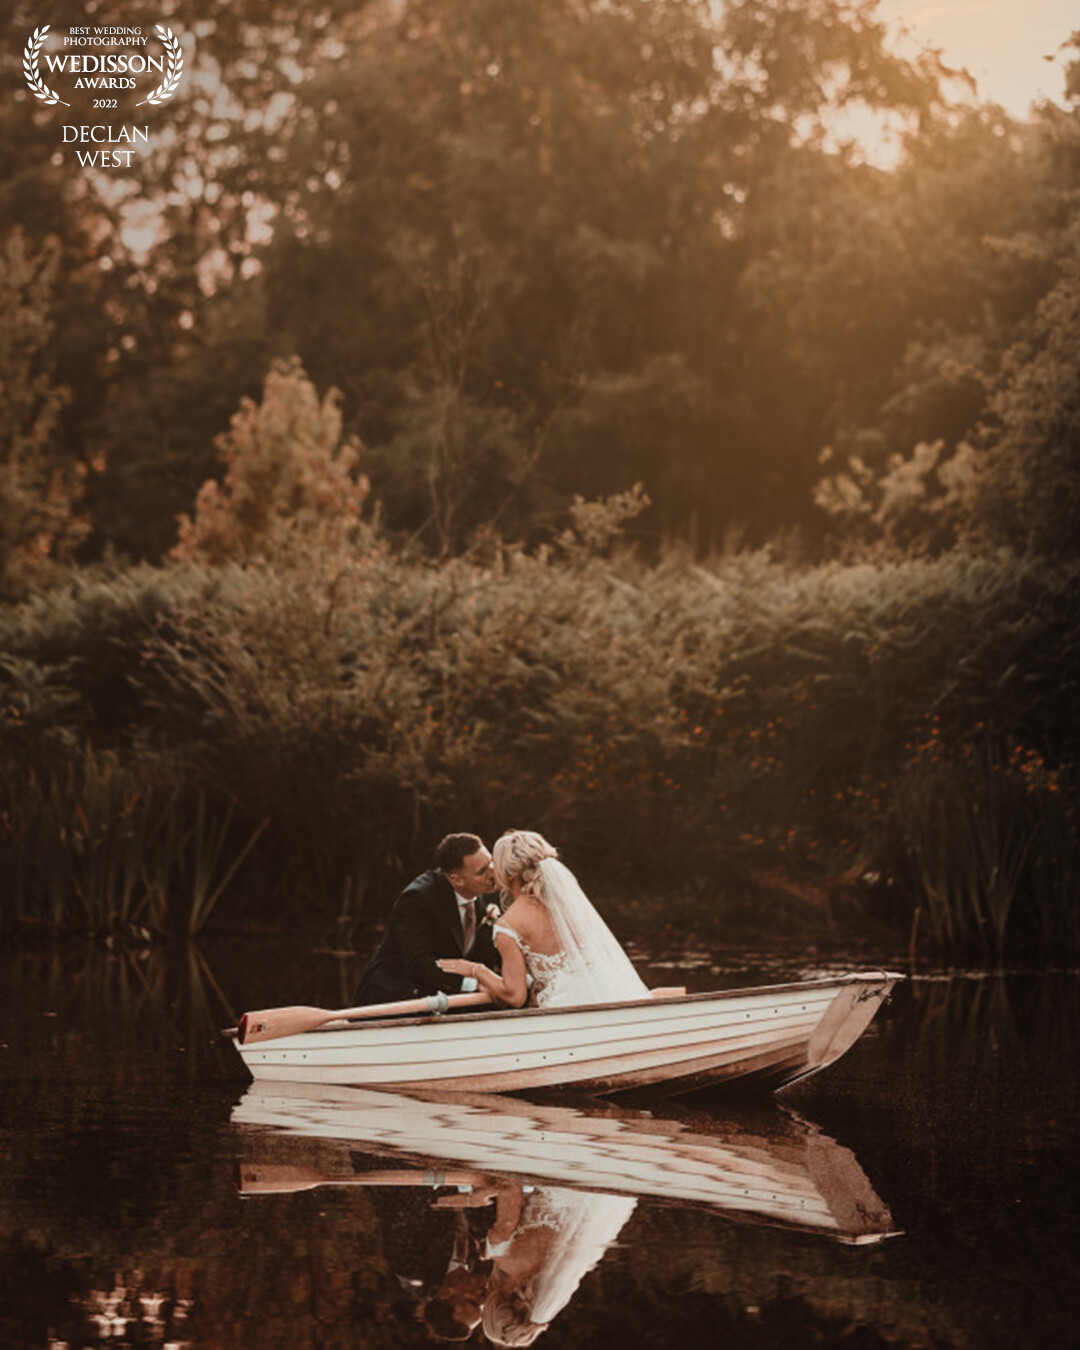 Having just finished an Ironman competition weeks before, there was no hesitation for Kelly to jump in a boat and pose for some photos with her new husband on their wedding day!